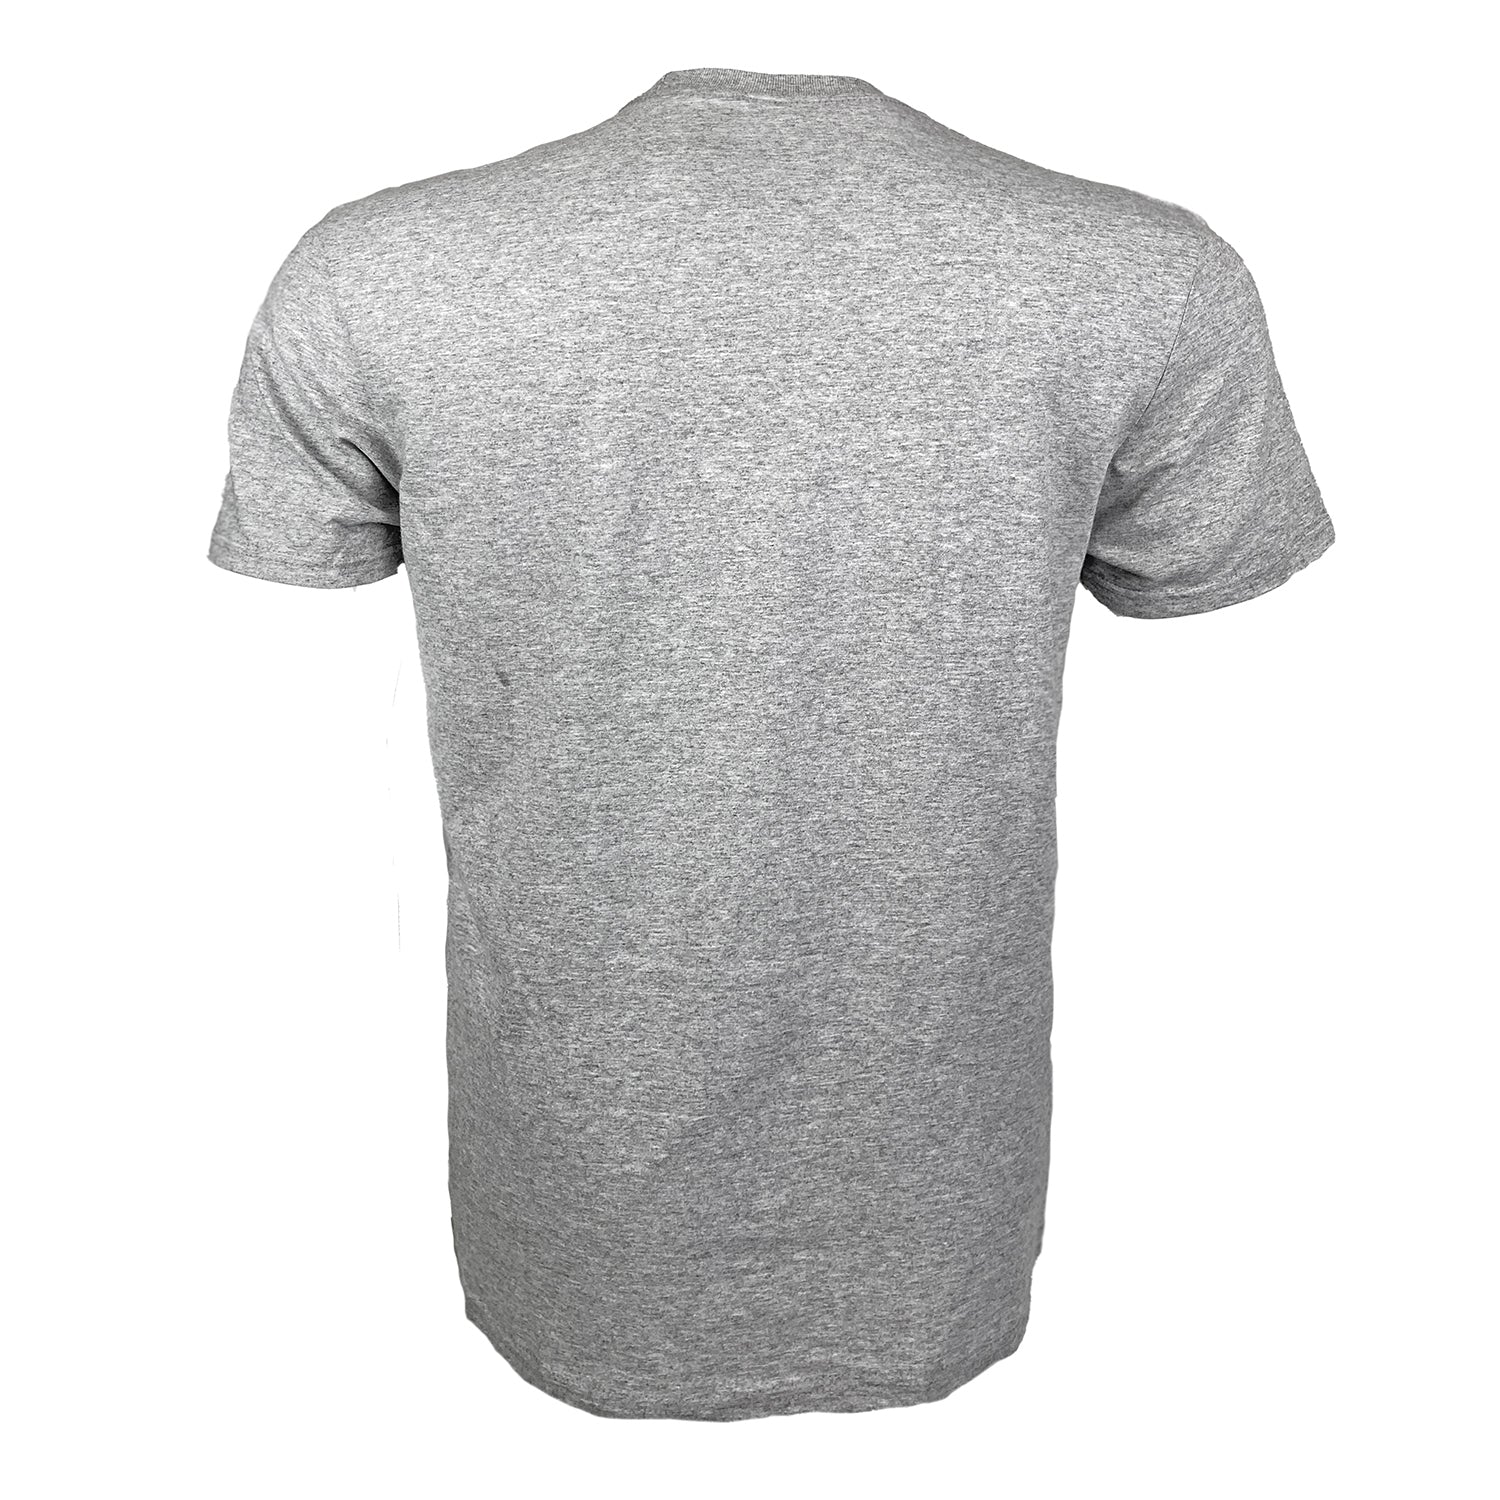 Gray tee shown from the rear.